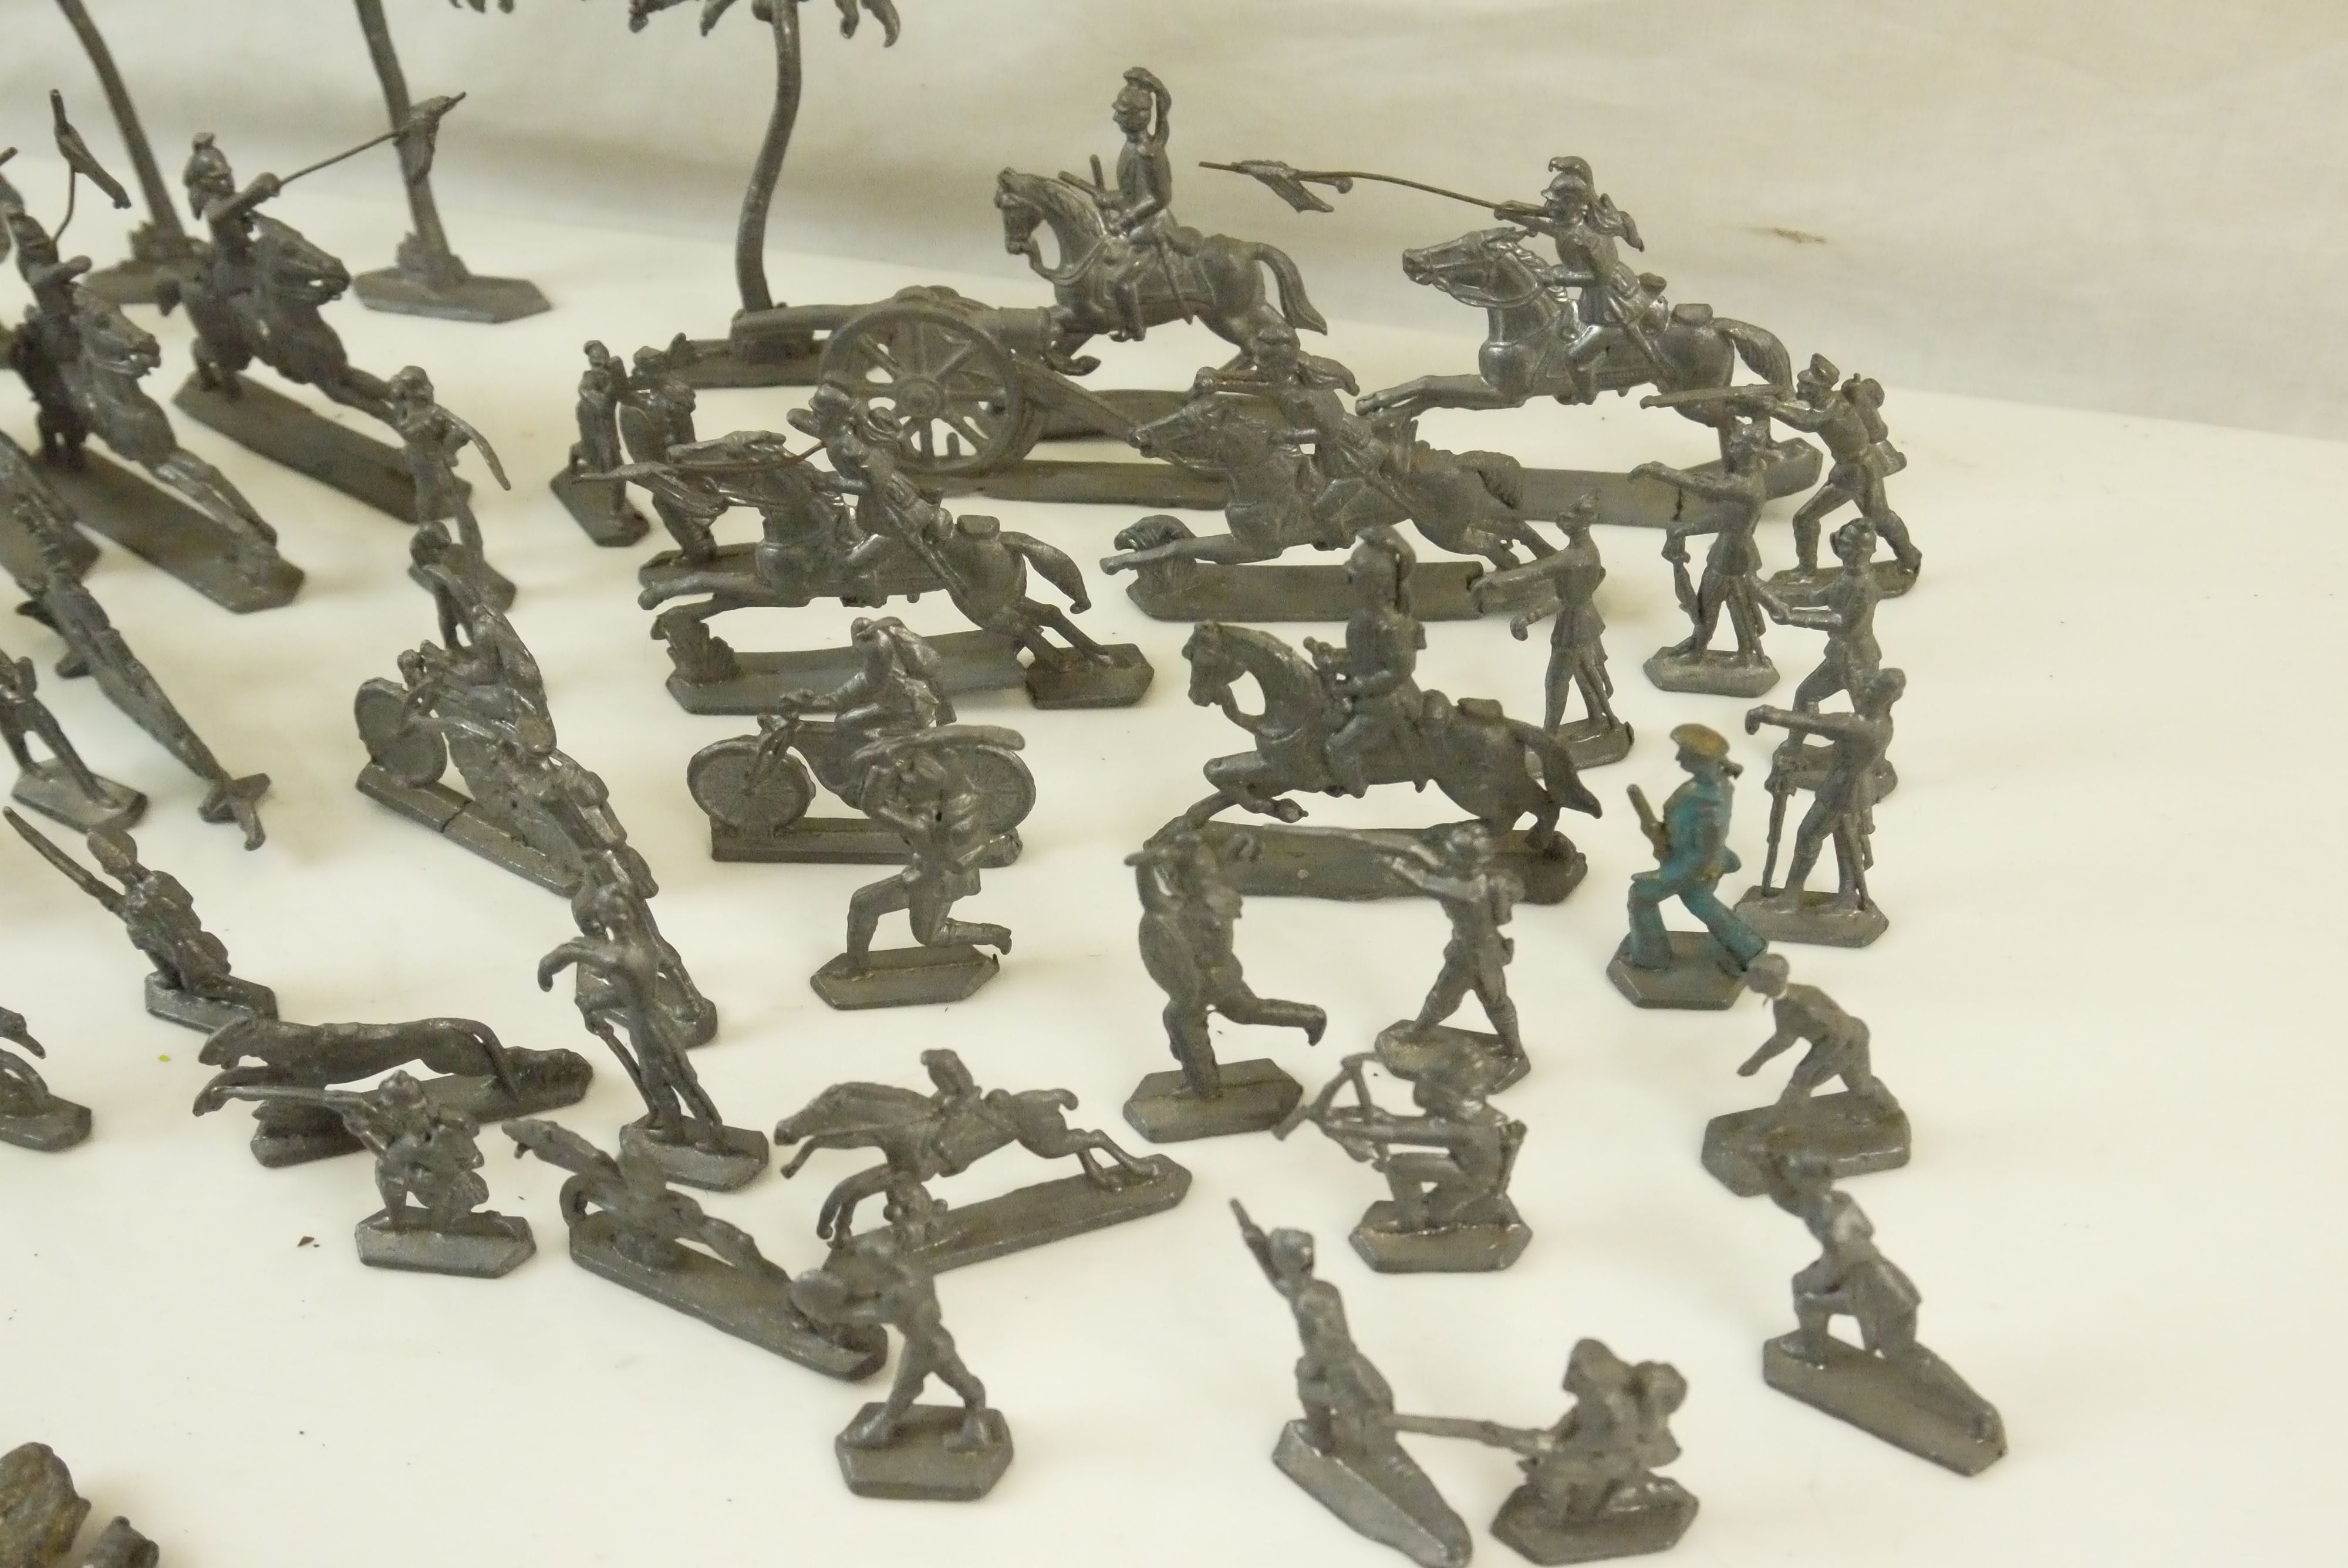 Collection of mid 20th C metal flats figures and accessories, various military subjects plus trees - Image 2 of 5